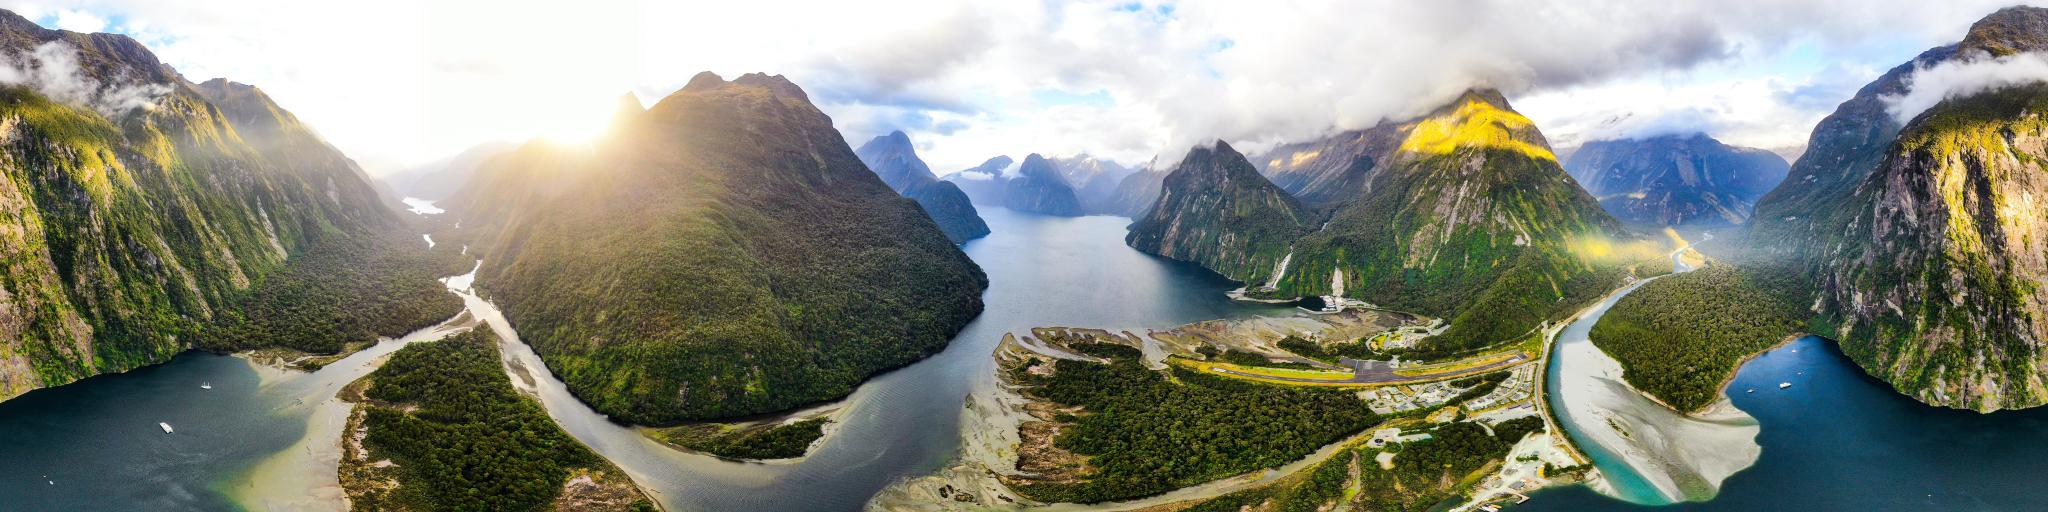 Milford Sound Drone pictures in New Zealand